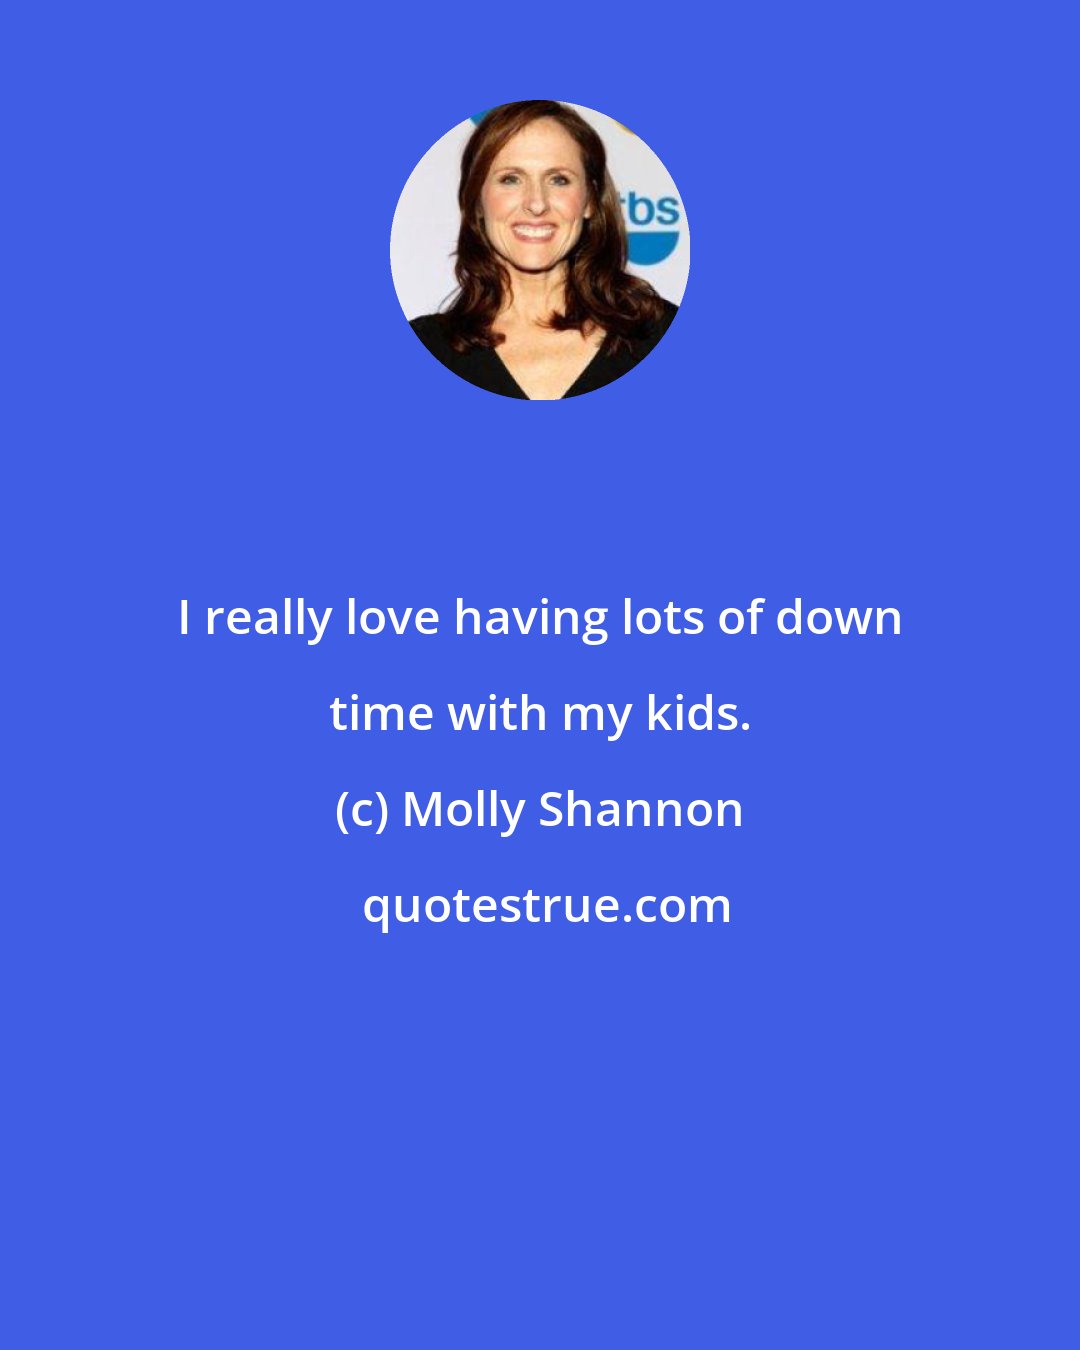 Molly Shannon: I really love having lots of down time with my kids.